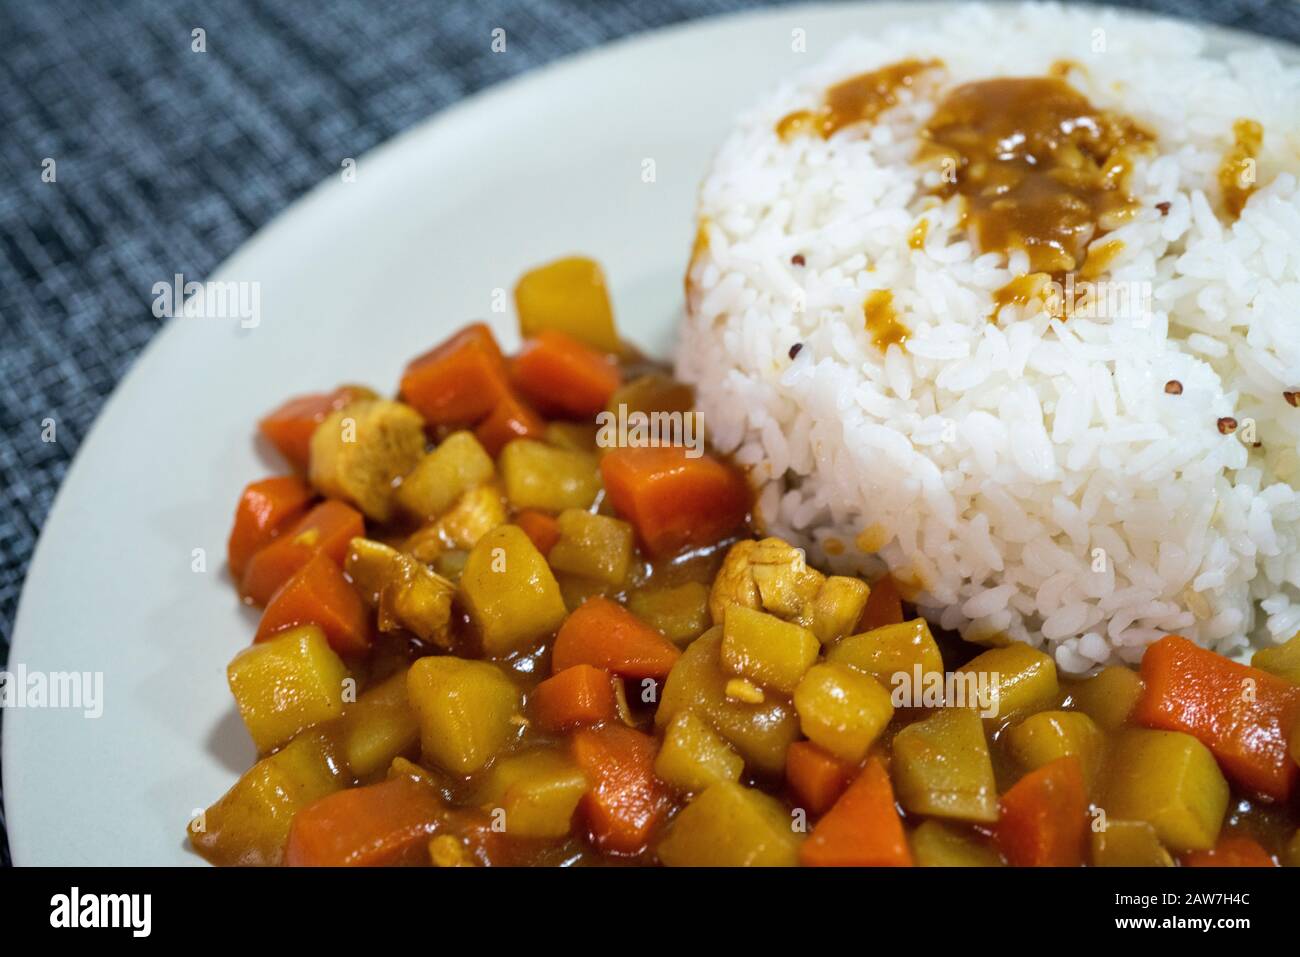 Cooked rice, curry with chicken, carrot and potato close-up on a plate on a table. Stock Photo